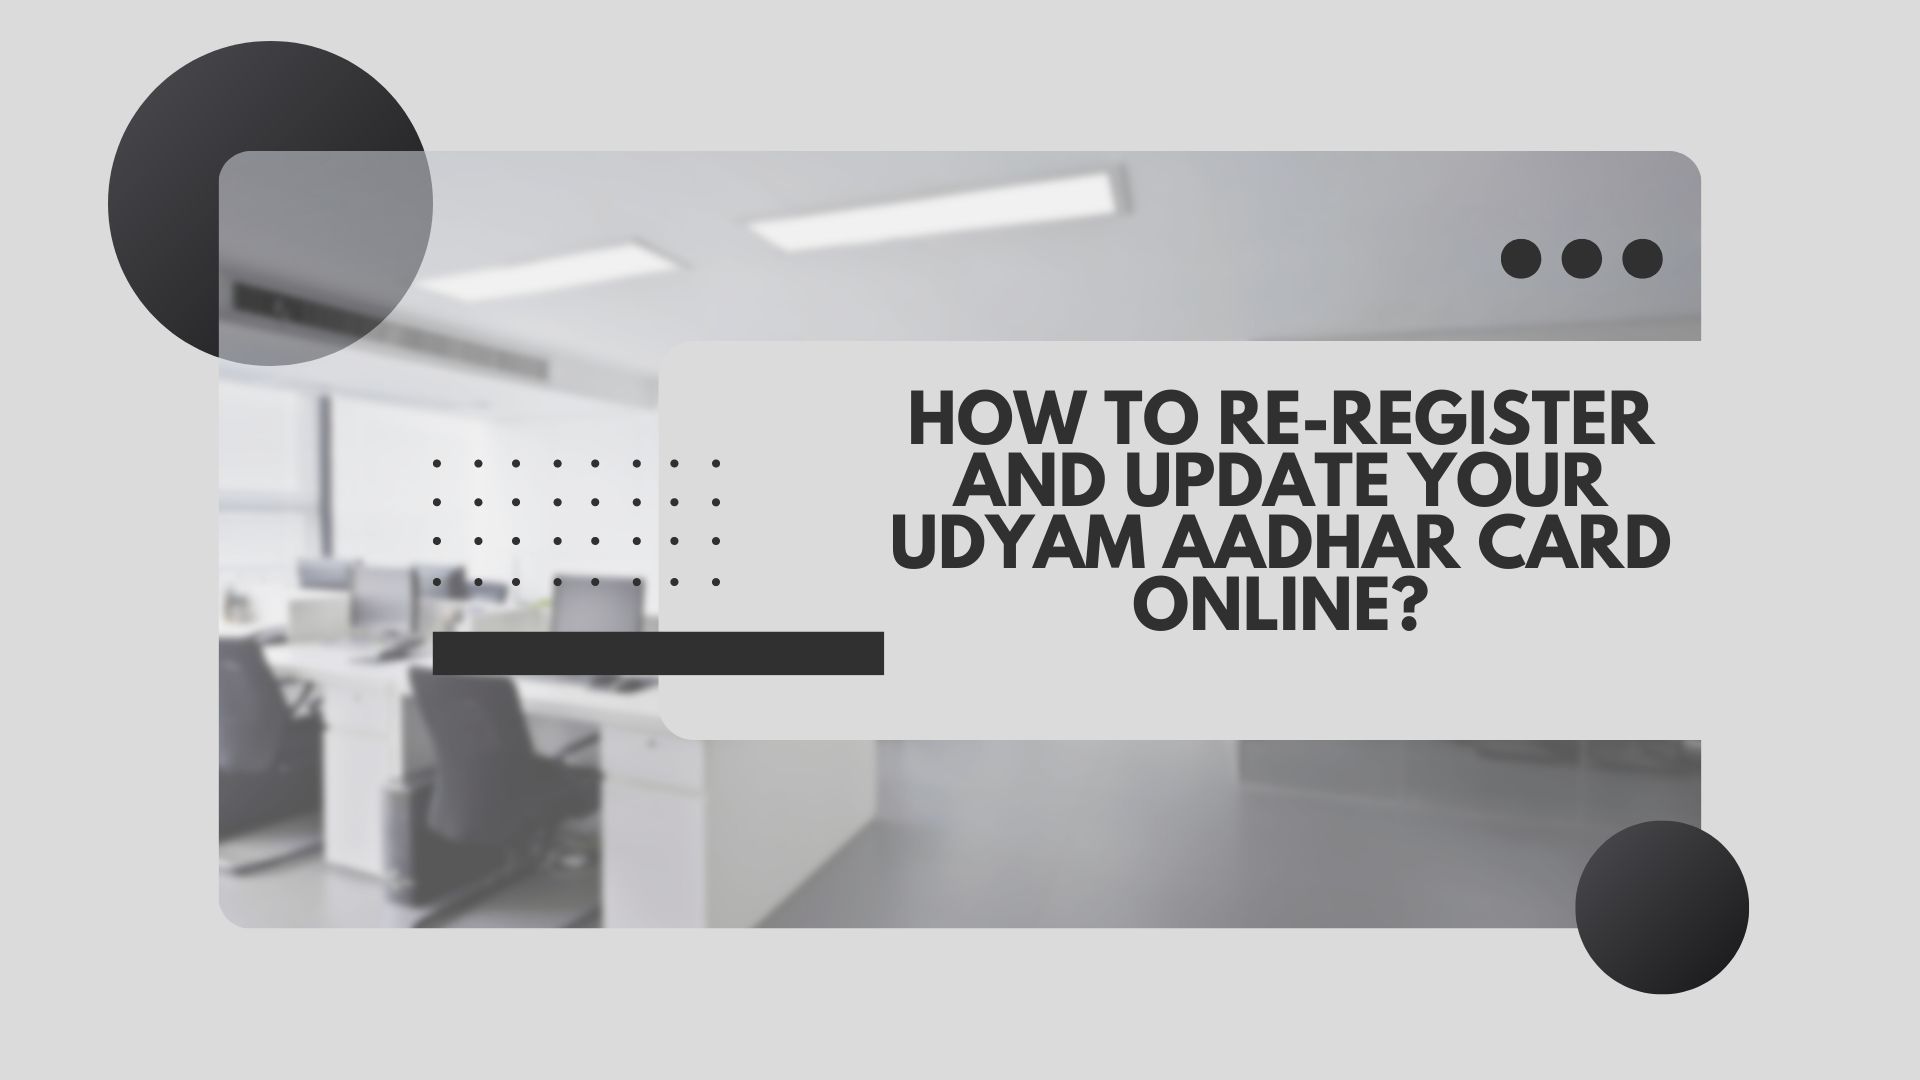 How to re-register and update Your Udyam Aadhar Card Online